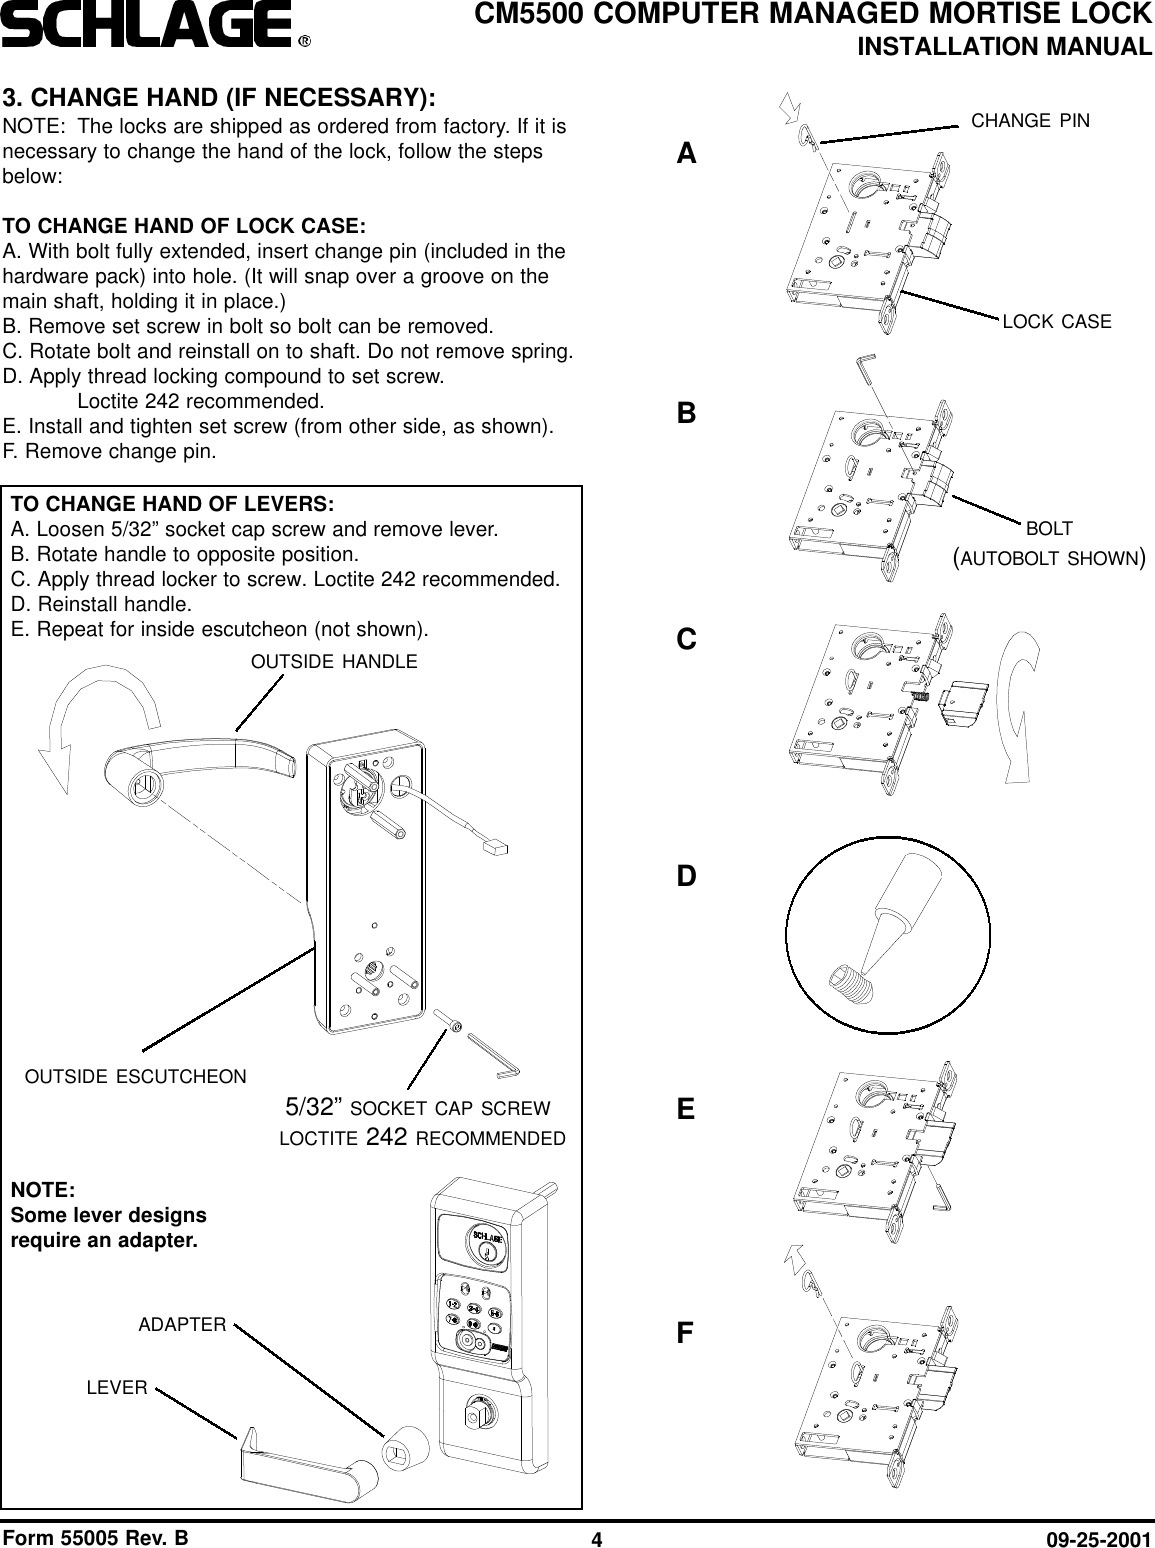 Form 55005 Rev. B 09-25-20014CM5500 COMPUTER MANAGED MORTISE LOCKINSTALLATION MANUAL3. CHANGE HAND (IF NECESSARY):NOTE: The locks are shipped as ordered from factory. If it isnecessary to change the hand of the lock, follow the stepsbelow:TO CHANGE HAND OF LOCK CASE:A. With bolt fully extended, insert change pin (included in thehardware pack) into hole. (It will snap over a groove on themain shaft, holding it in place.)B. Remove set screw in bolt so bolt can be removed.C. Rotate bolt and reinstall on to shaft. Do not remove spring.D. Apply thread locking compound to set screw. Loctite 242 recommended.E. Install and tighten set screw (from other side, as shown).F. Remove change pin.5/32” SOCKET CAP SCREWLOCTITE 242 RECOMMENDEDOUTSIDE ESCUTCHEONADAPTERLEVEROUTSIDE HANDLECHANGE PINLOCK CASEBOLT(AUTOBOLT SHOWN)TO CHANGE HAND OF LEVERS:A. Loosen 5/32” socket cap screw and remove lever.B. Rotate handle to opposite position.C. Apply thread locker to screw. Loctite 242 recommended.D. Reinstall handle.E. Repeat for inside escutcheon (not shown).NOTE: Some lever designsrequire an adapter.ABCEDF